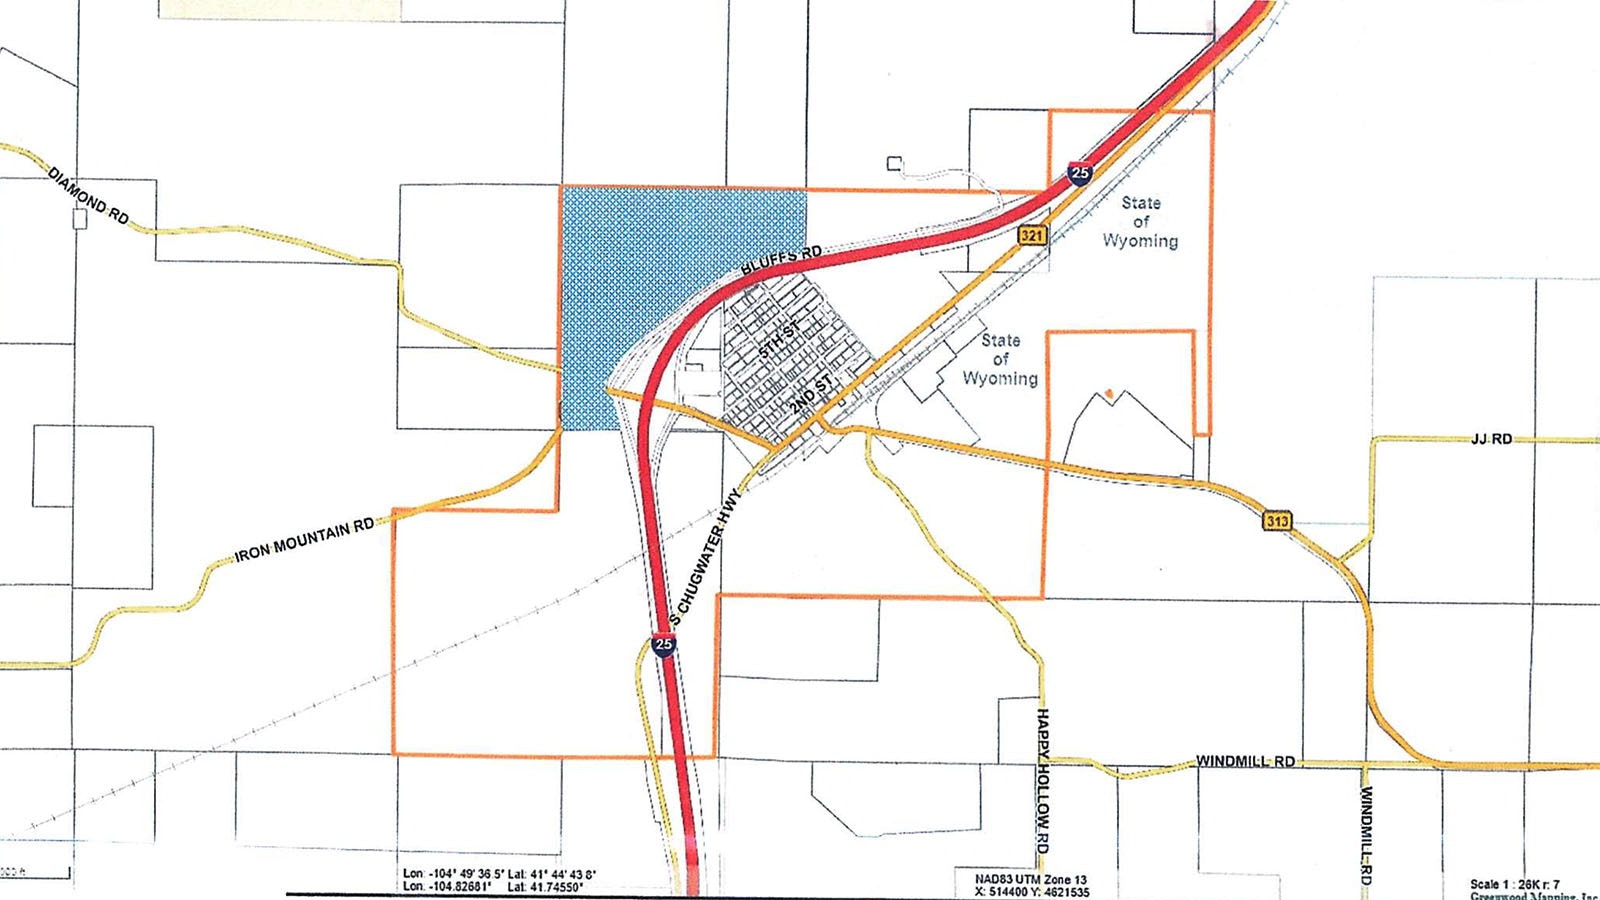 This map shows the area shaded in blue west of Interstate 25 where three landowners want to de-annex 172 across from the town of Chugwater, Wyoming.